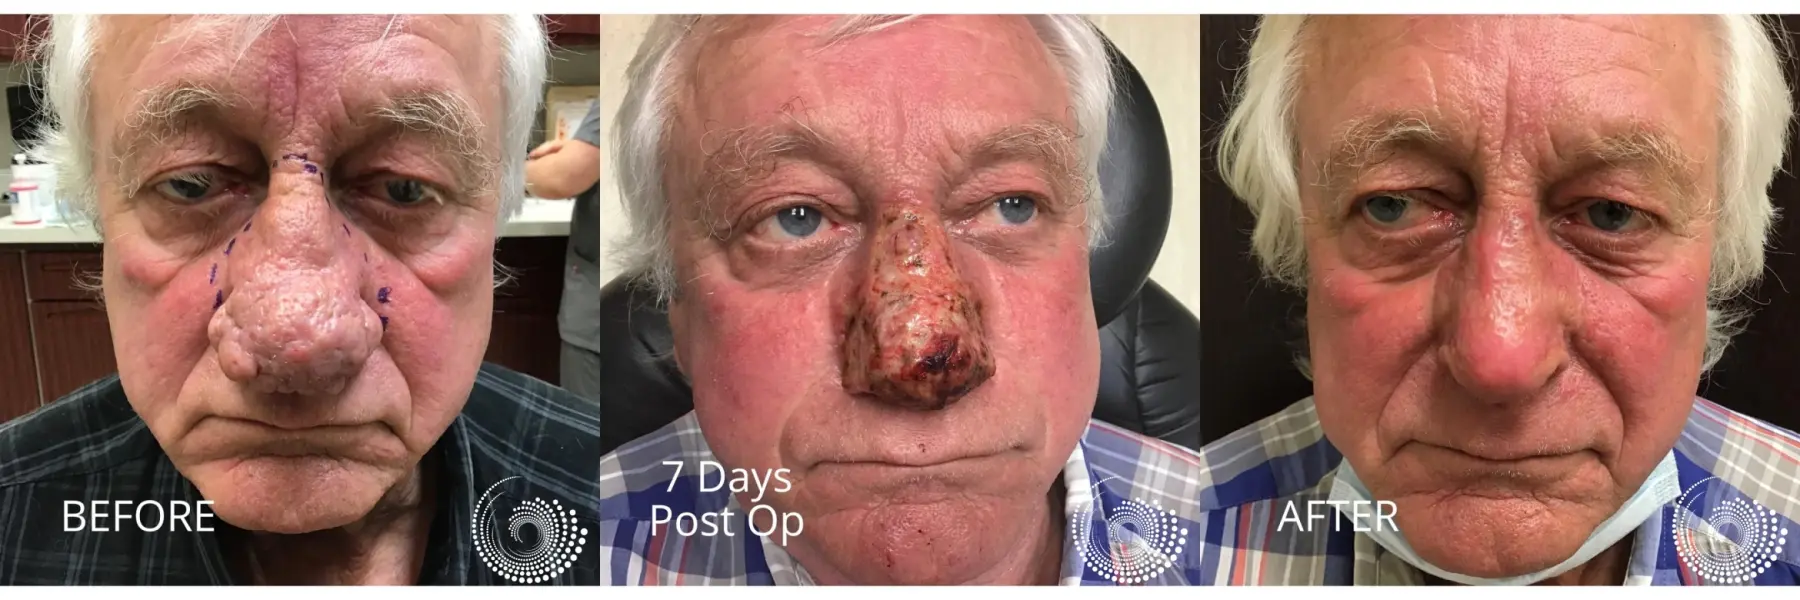 Rhinophyma treatment to restore nose - Before and After 1